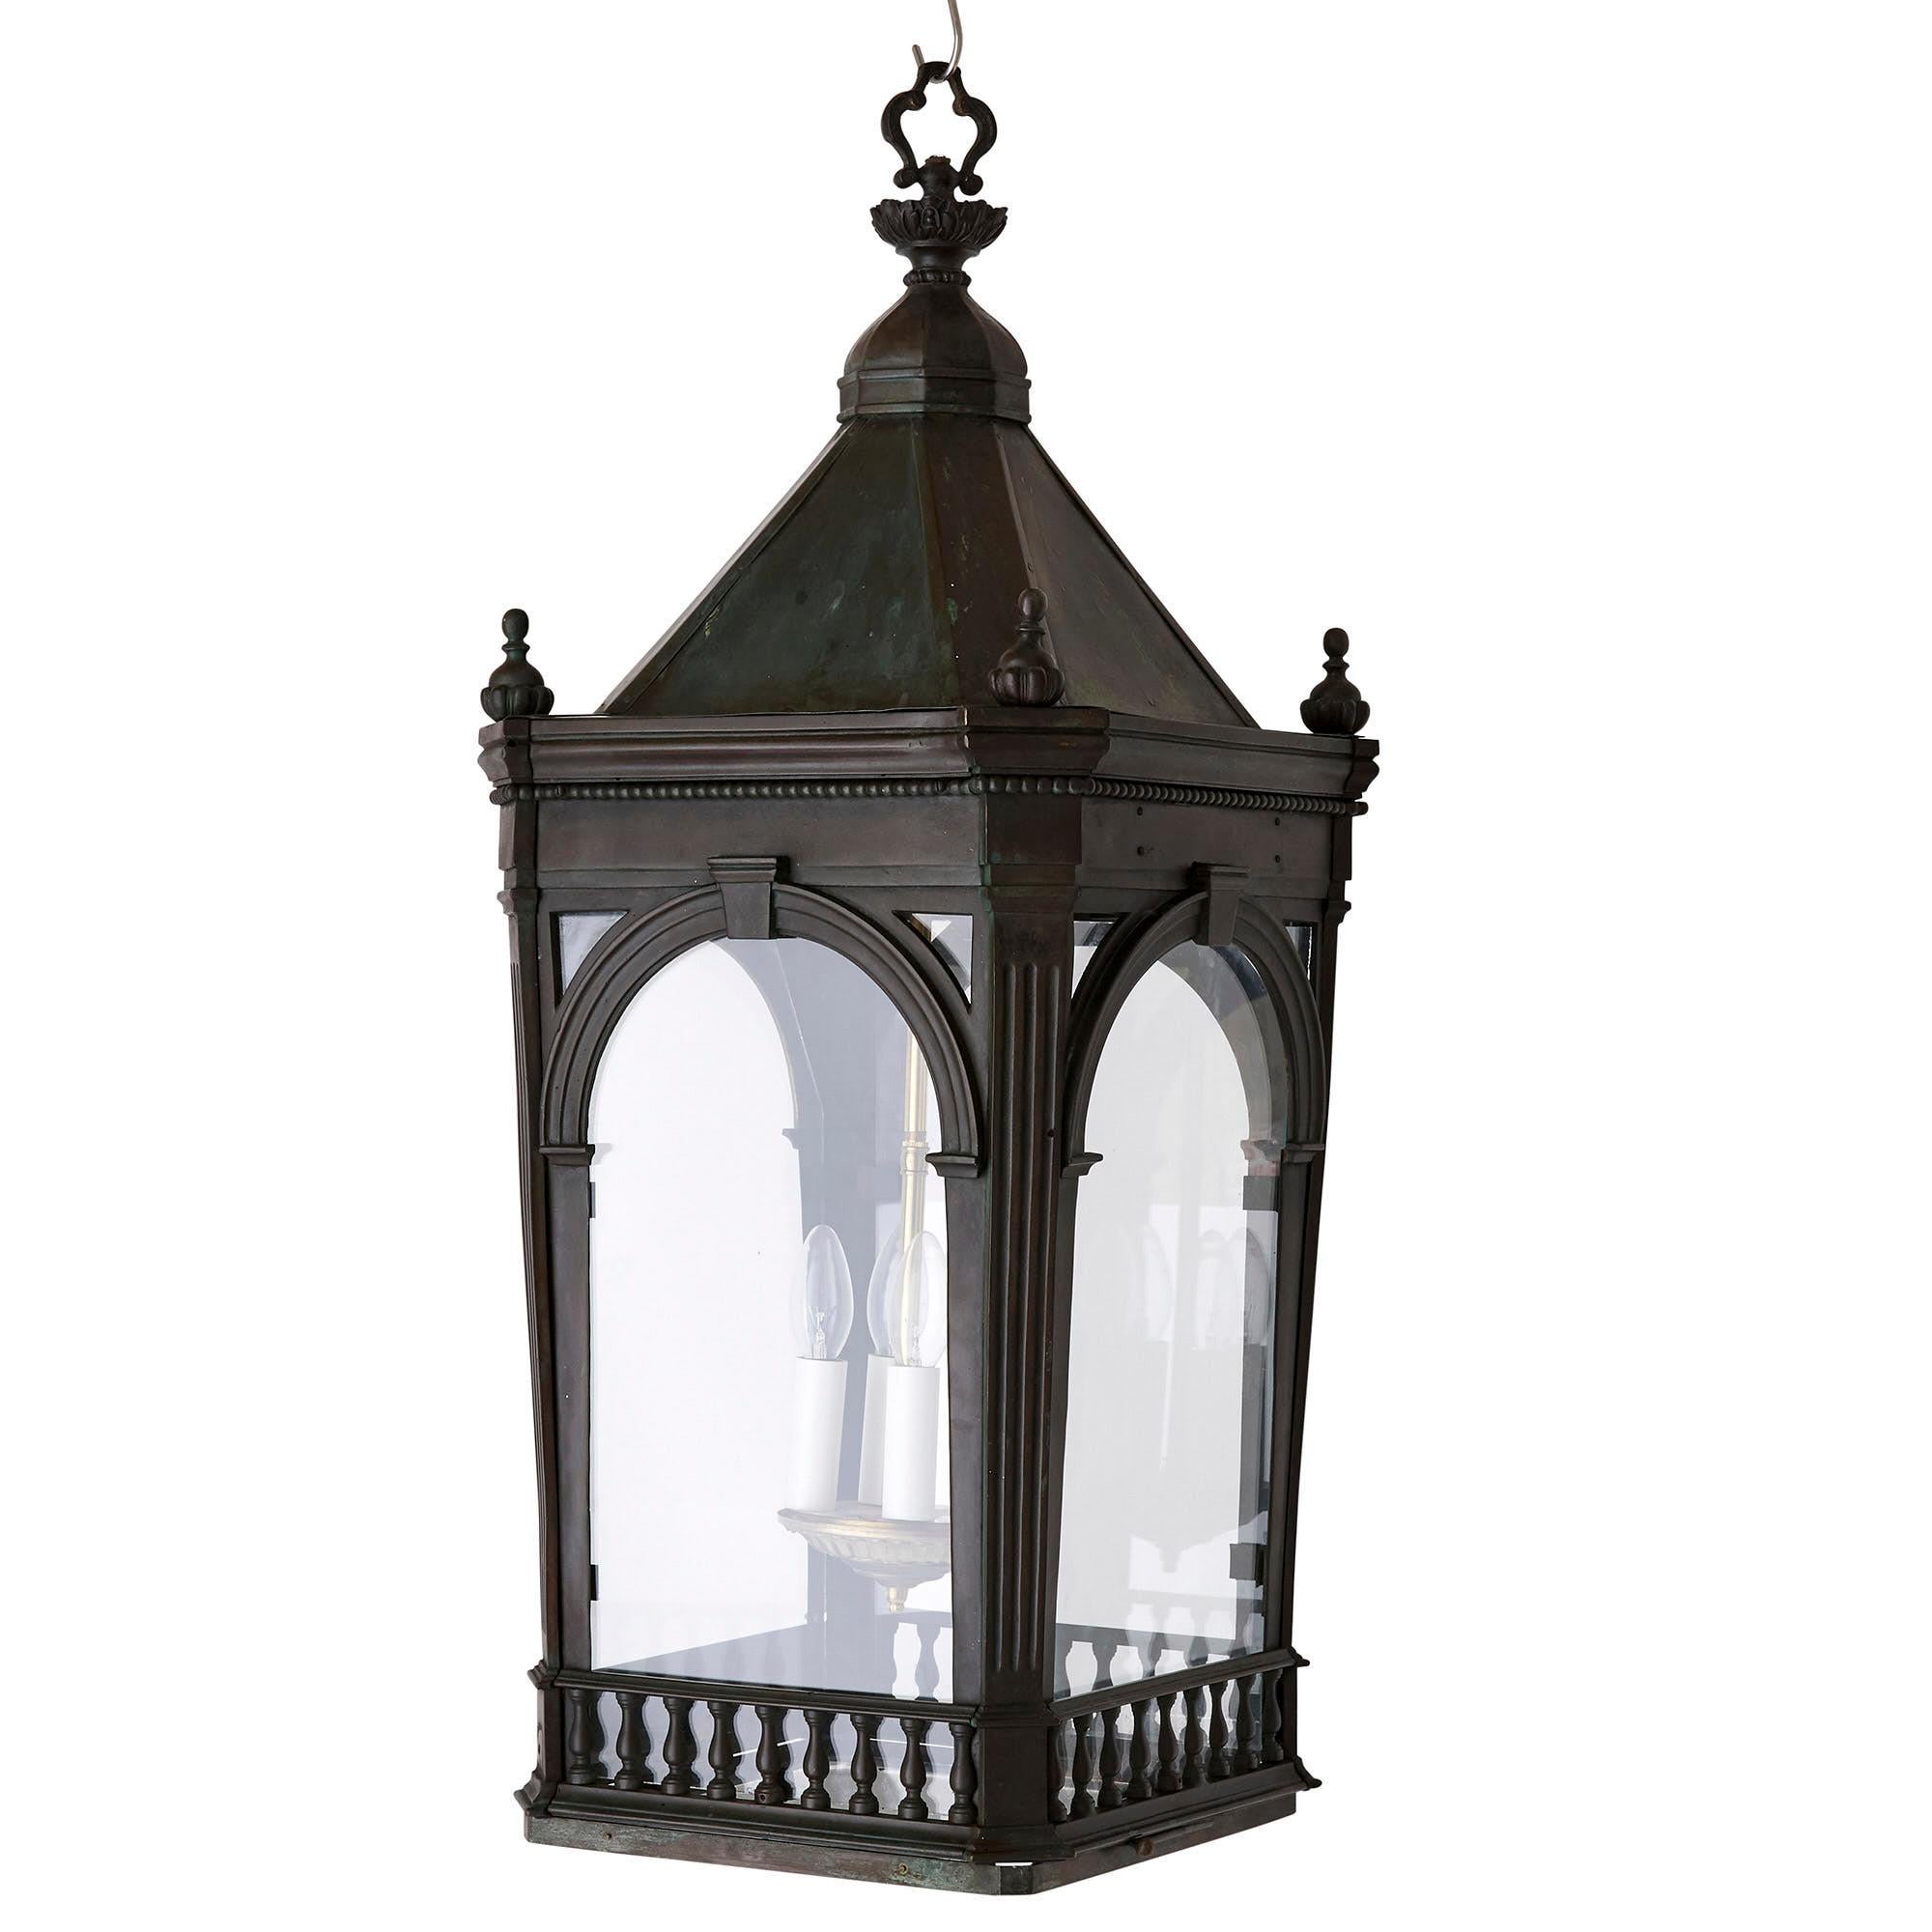 Antique architectural Victorian period brass four-light lantern
English, late 19th century
Dimensions: Height 94cm, width 39cm, depth 39cm

Finely crafted from patinated brass and glass, this four-light lantern is architecturally designed in the